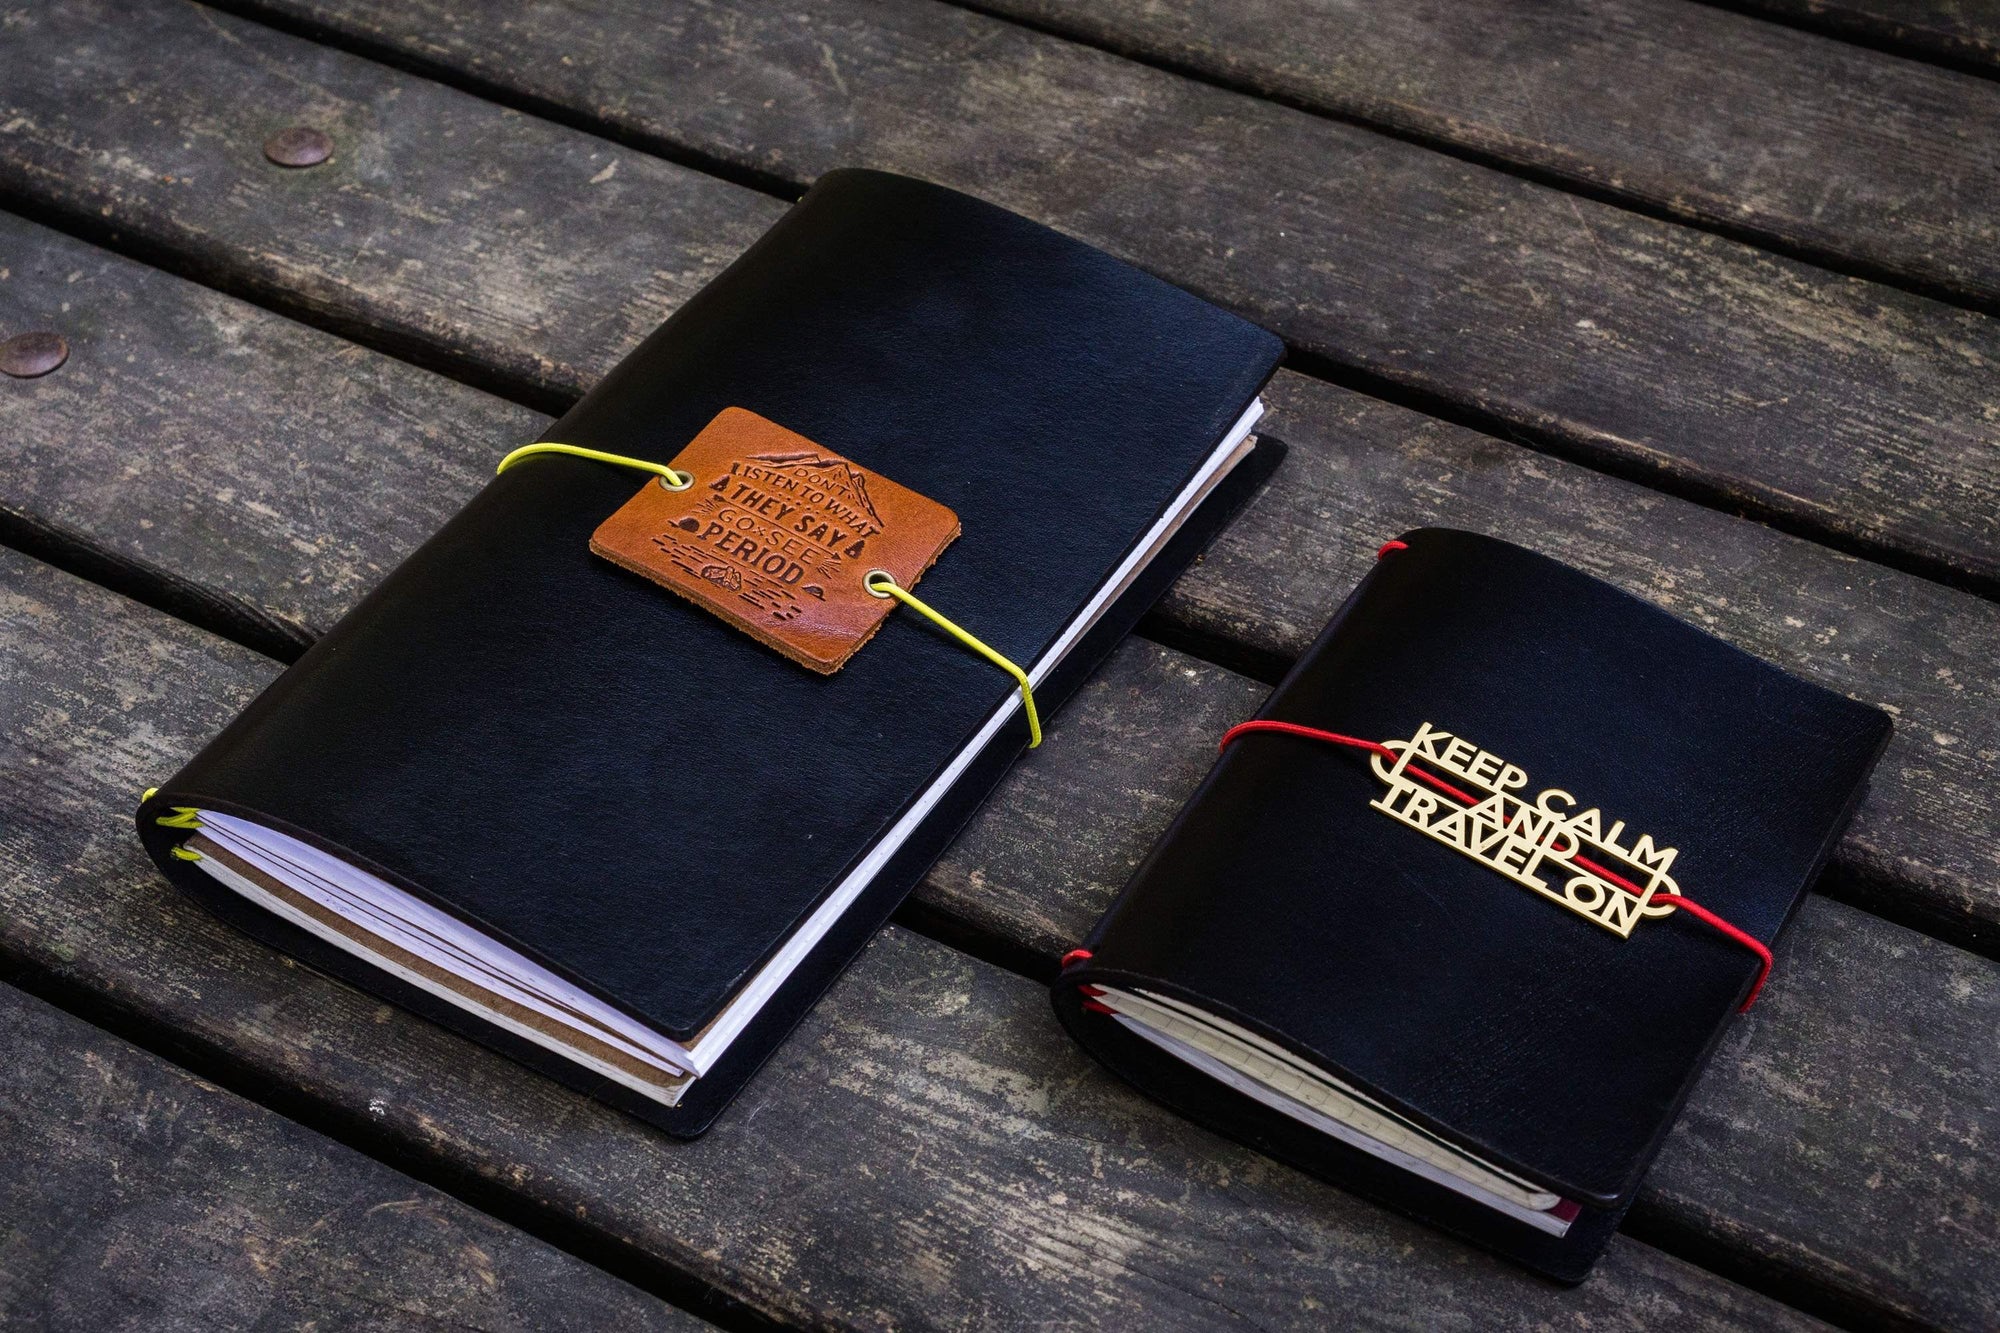 Leather Traveler's Notebooks / Journals / Covers - Galen - Galen Leather